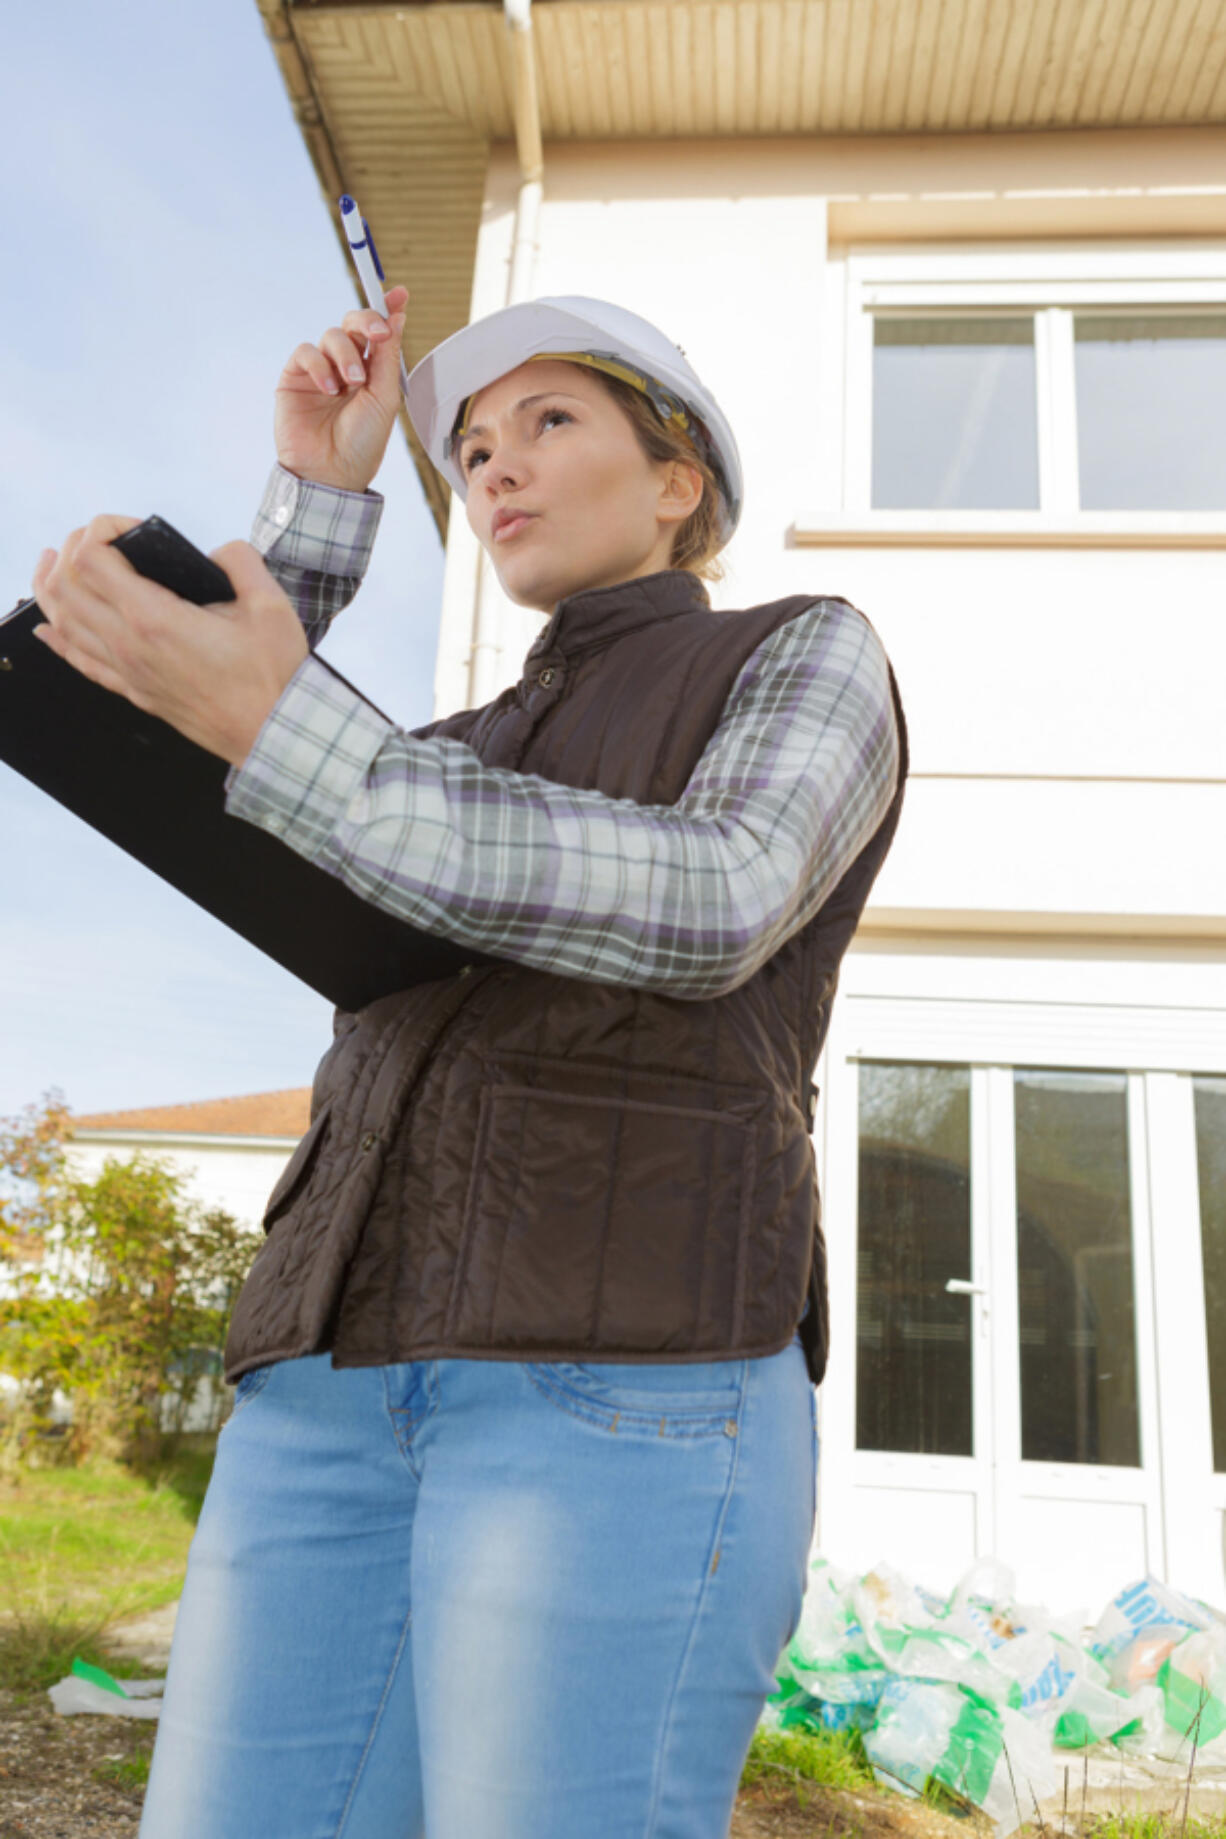 Warranties are no replacement for a bona fide home inspection.